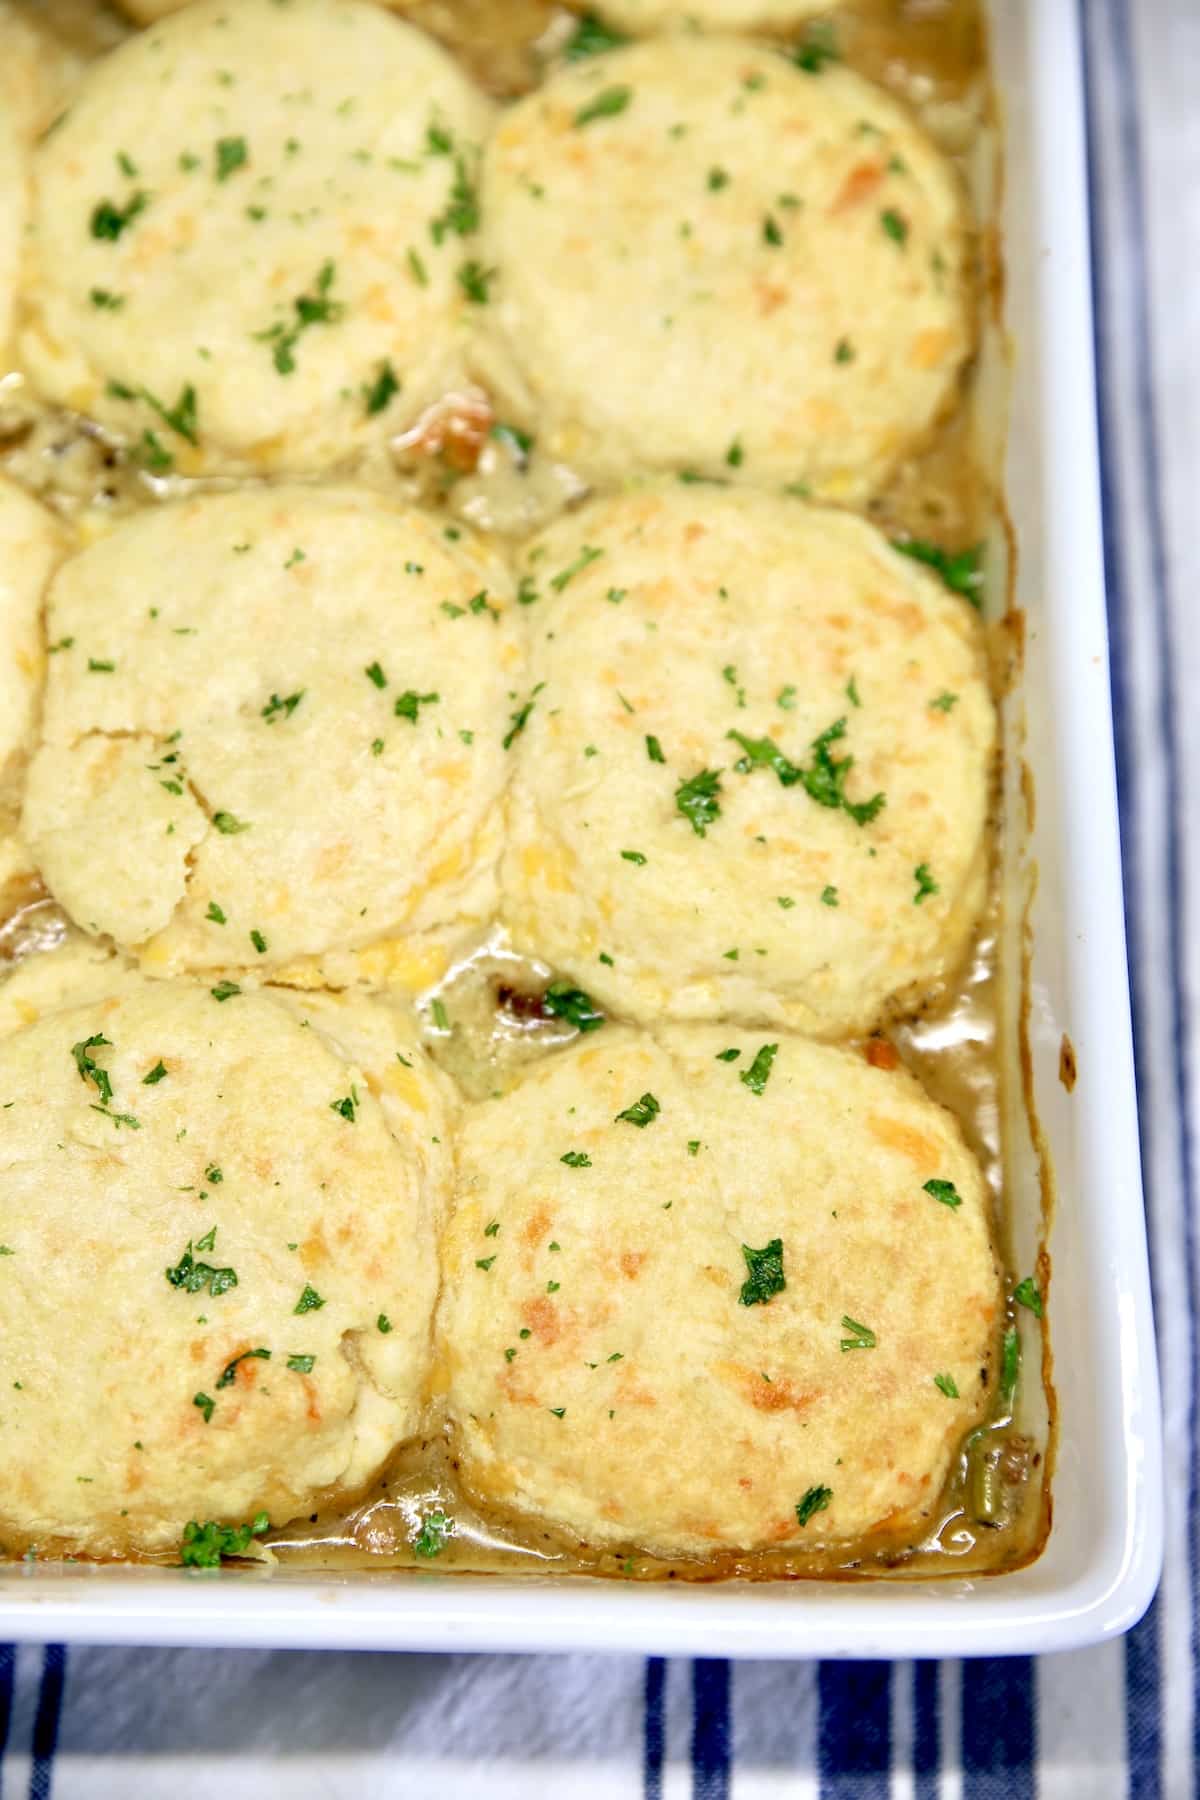 Casserole dish with chicken and biscuits.